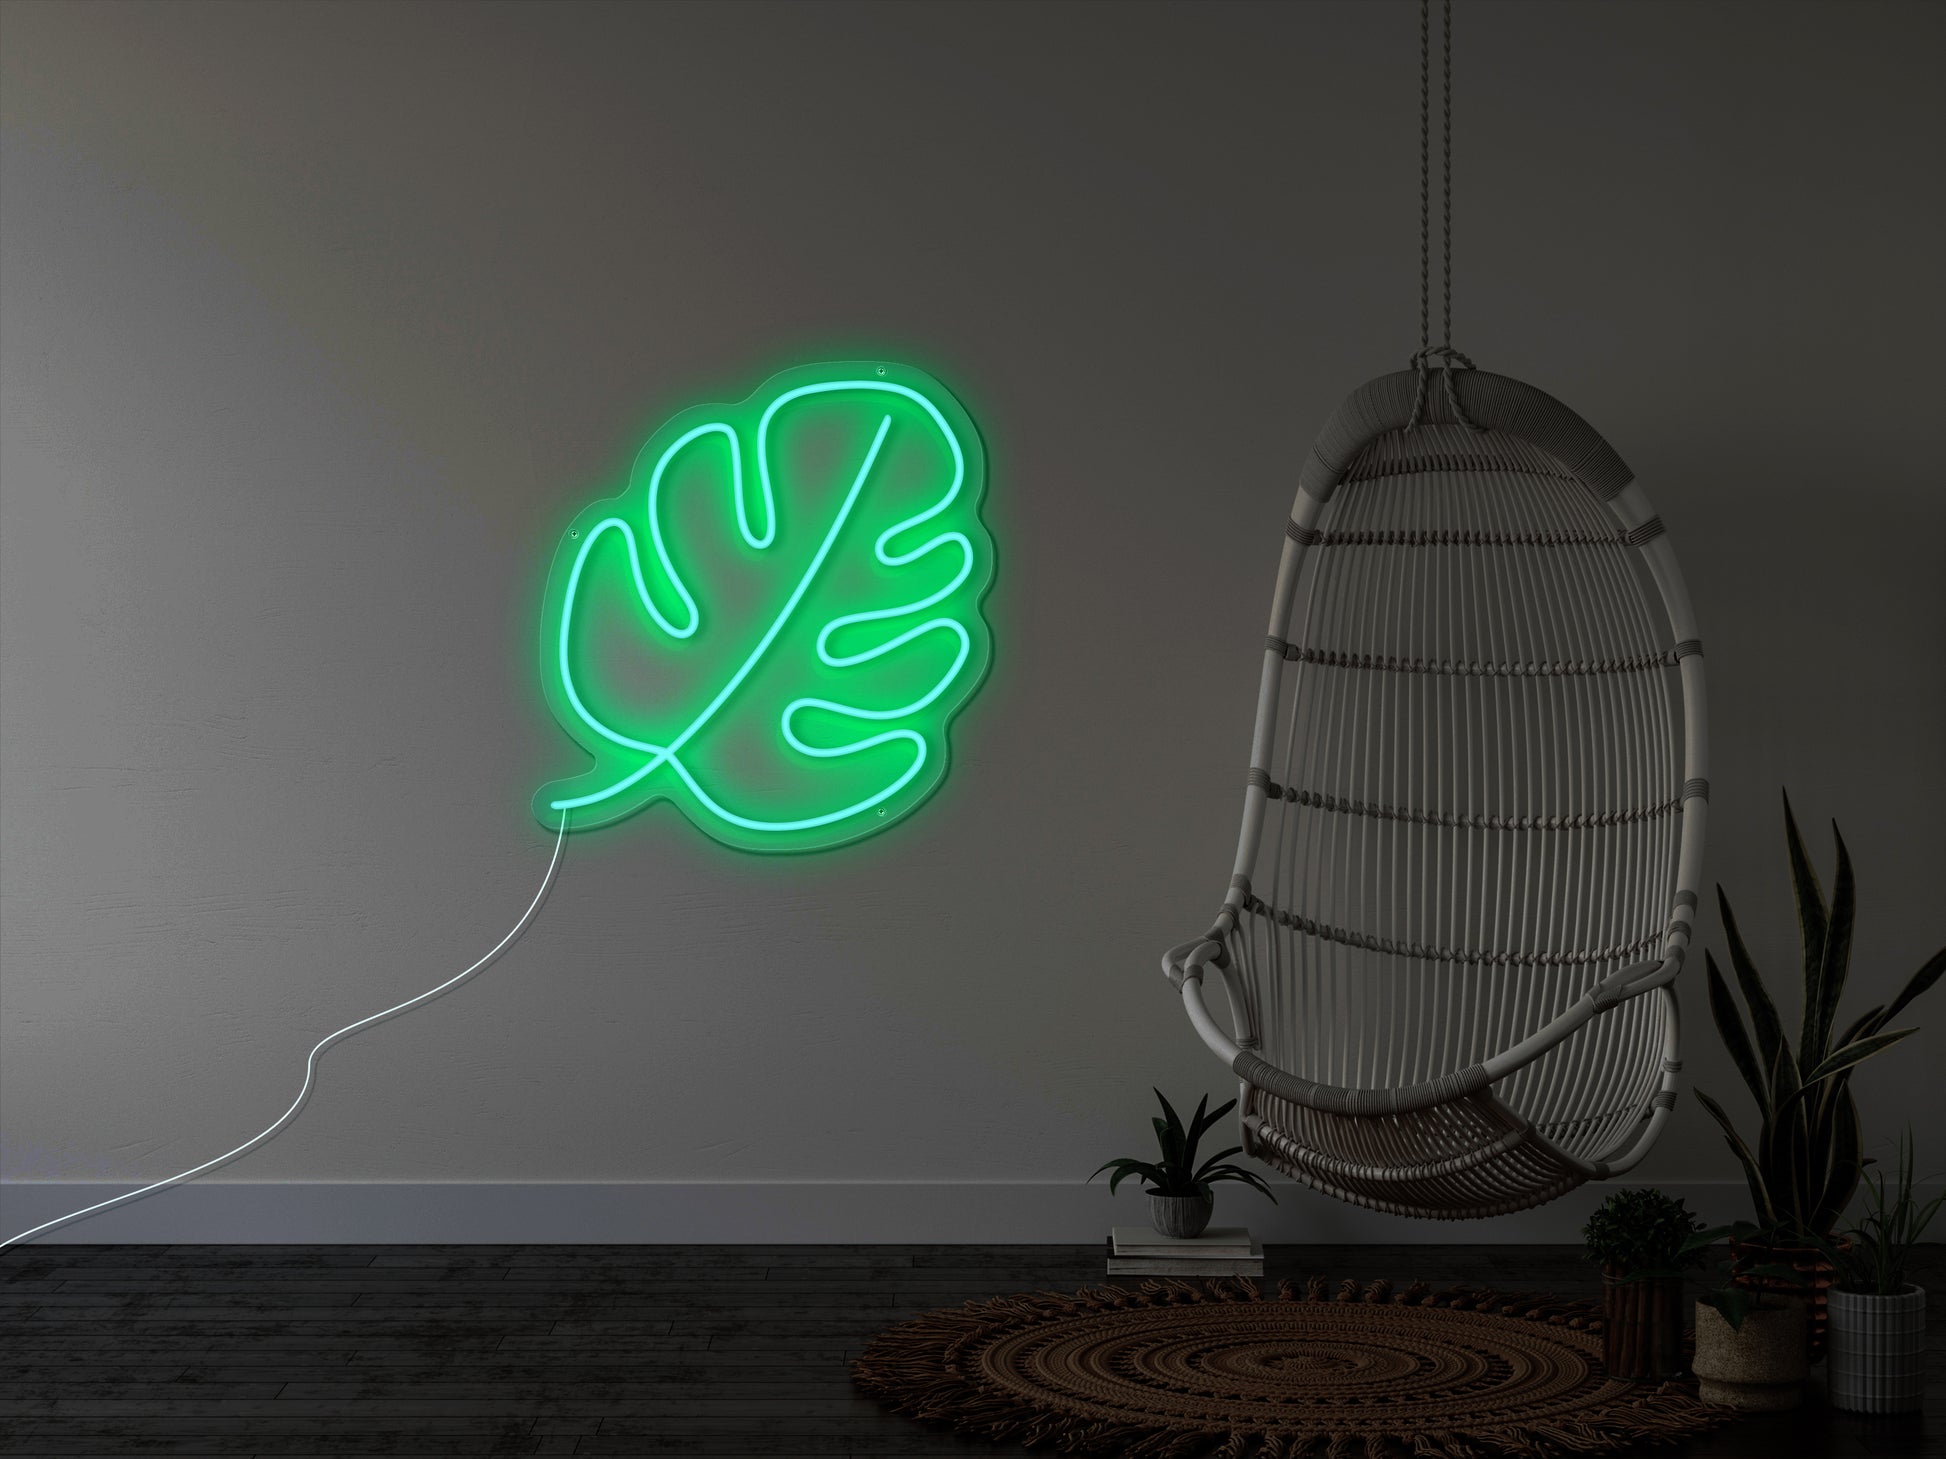 "A bright neon sign of a monstera leaf, with the leaves in green and the veins in yellow, illuminating a dimly lit room, perfect for a plant lover or tropical-themed decoration